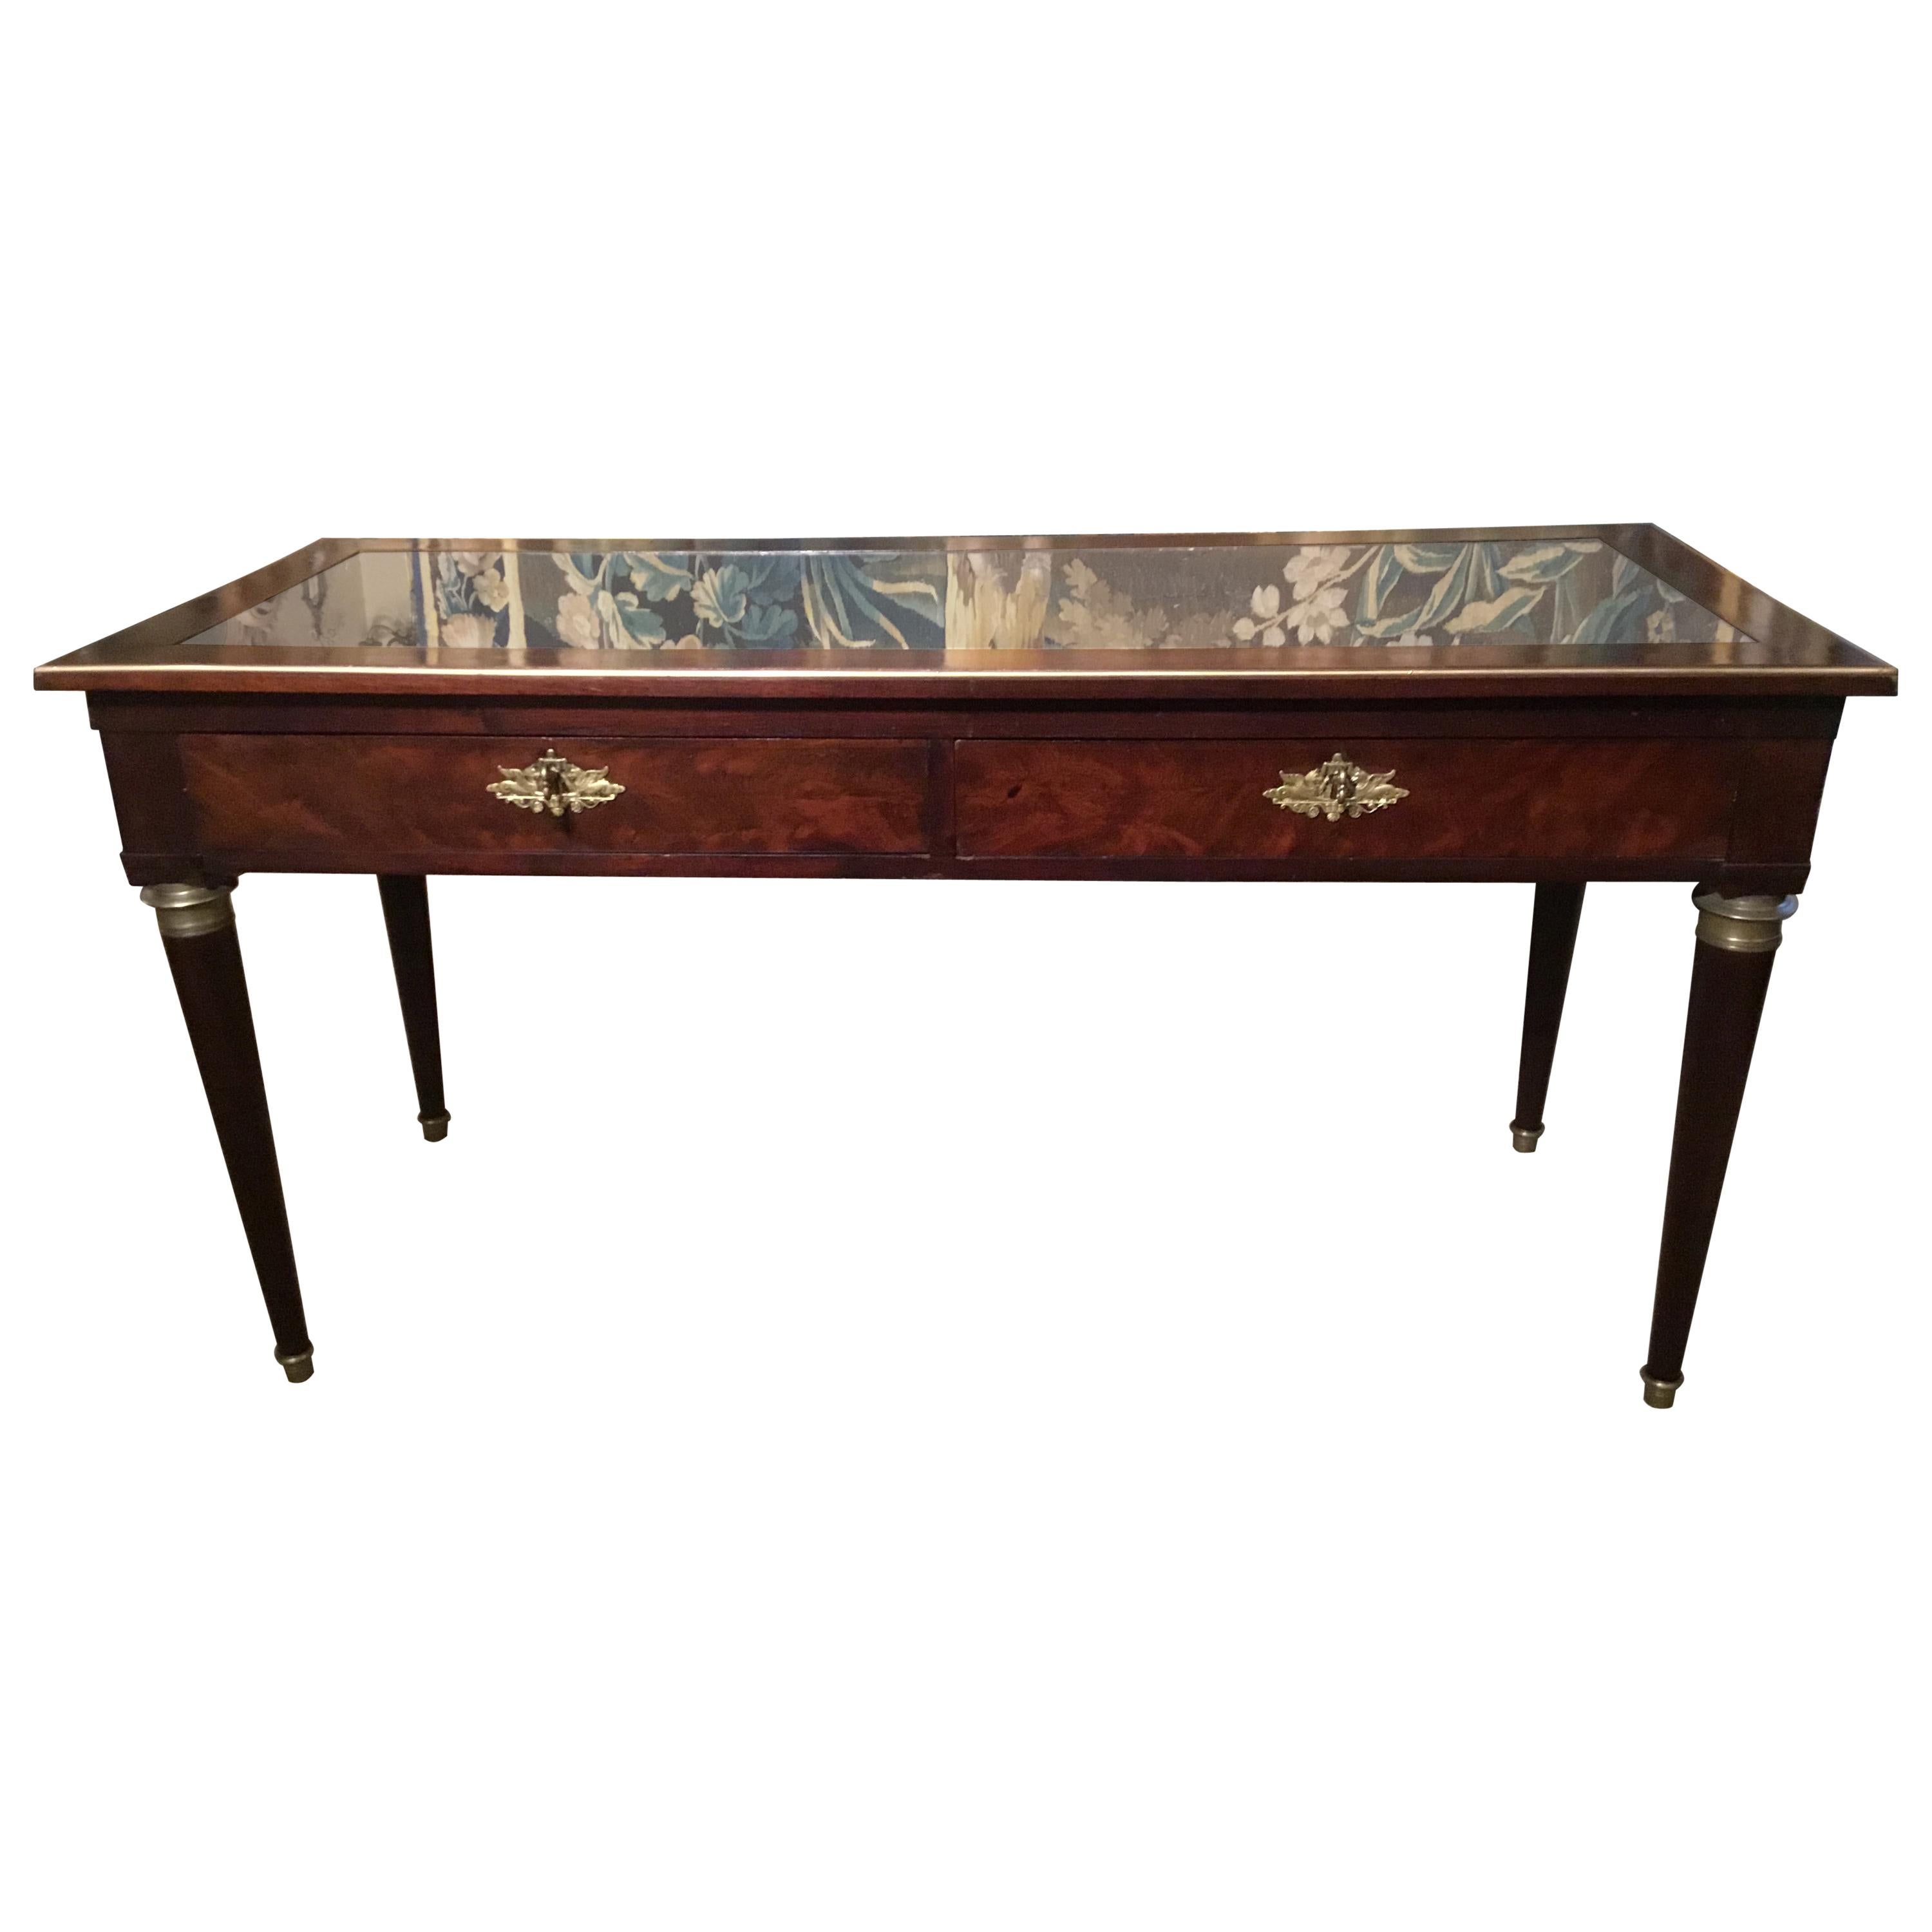 French Empire Console/Writing Table 19th c. with Bronze Mounts and Glass Top